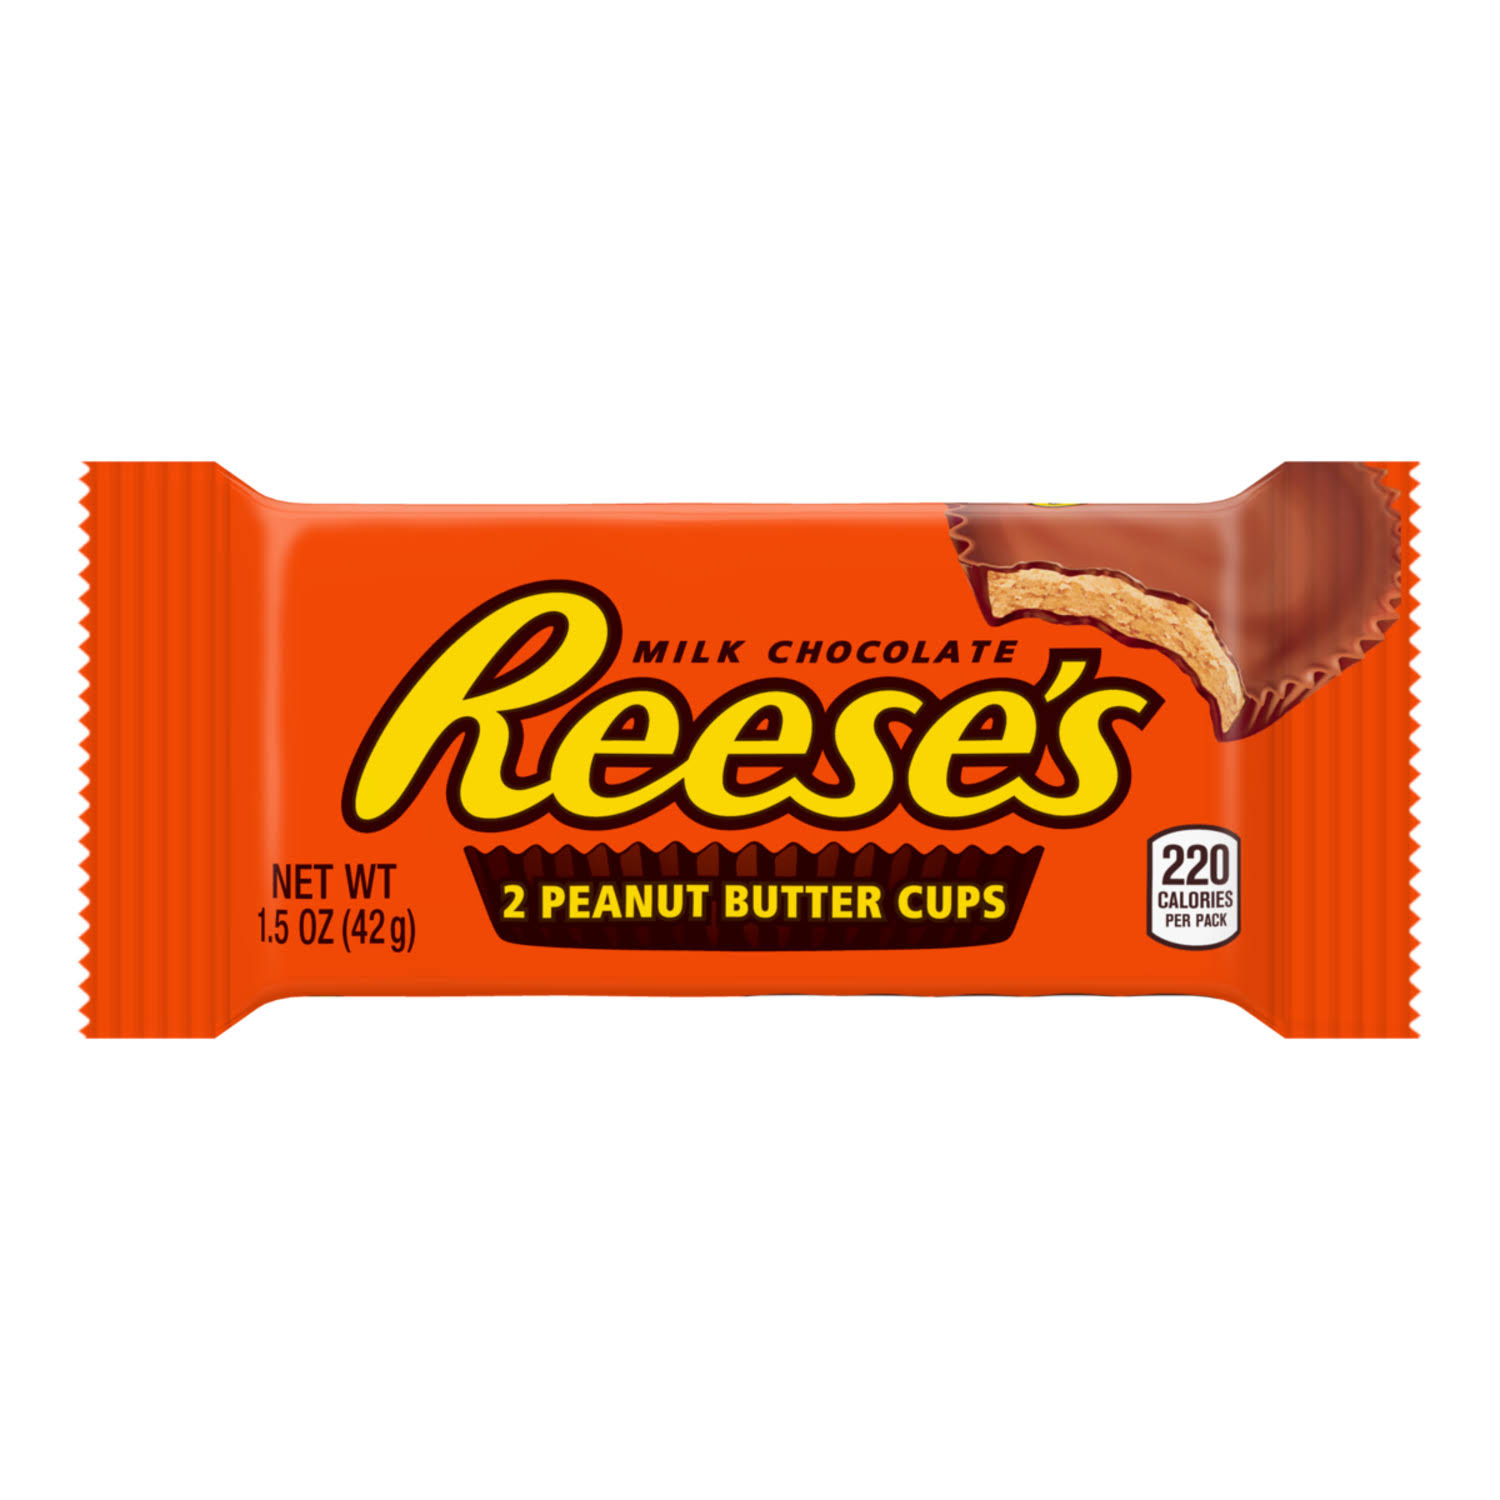 Reese's Peanut Butter Cup 42g